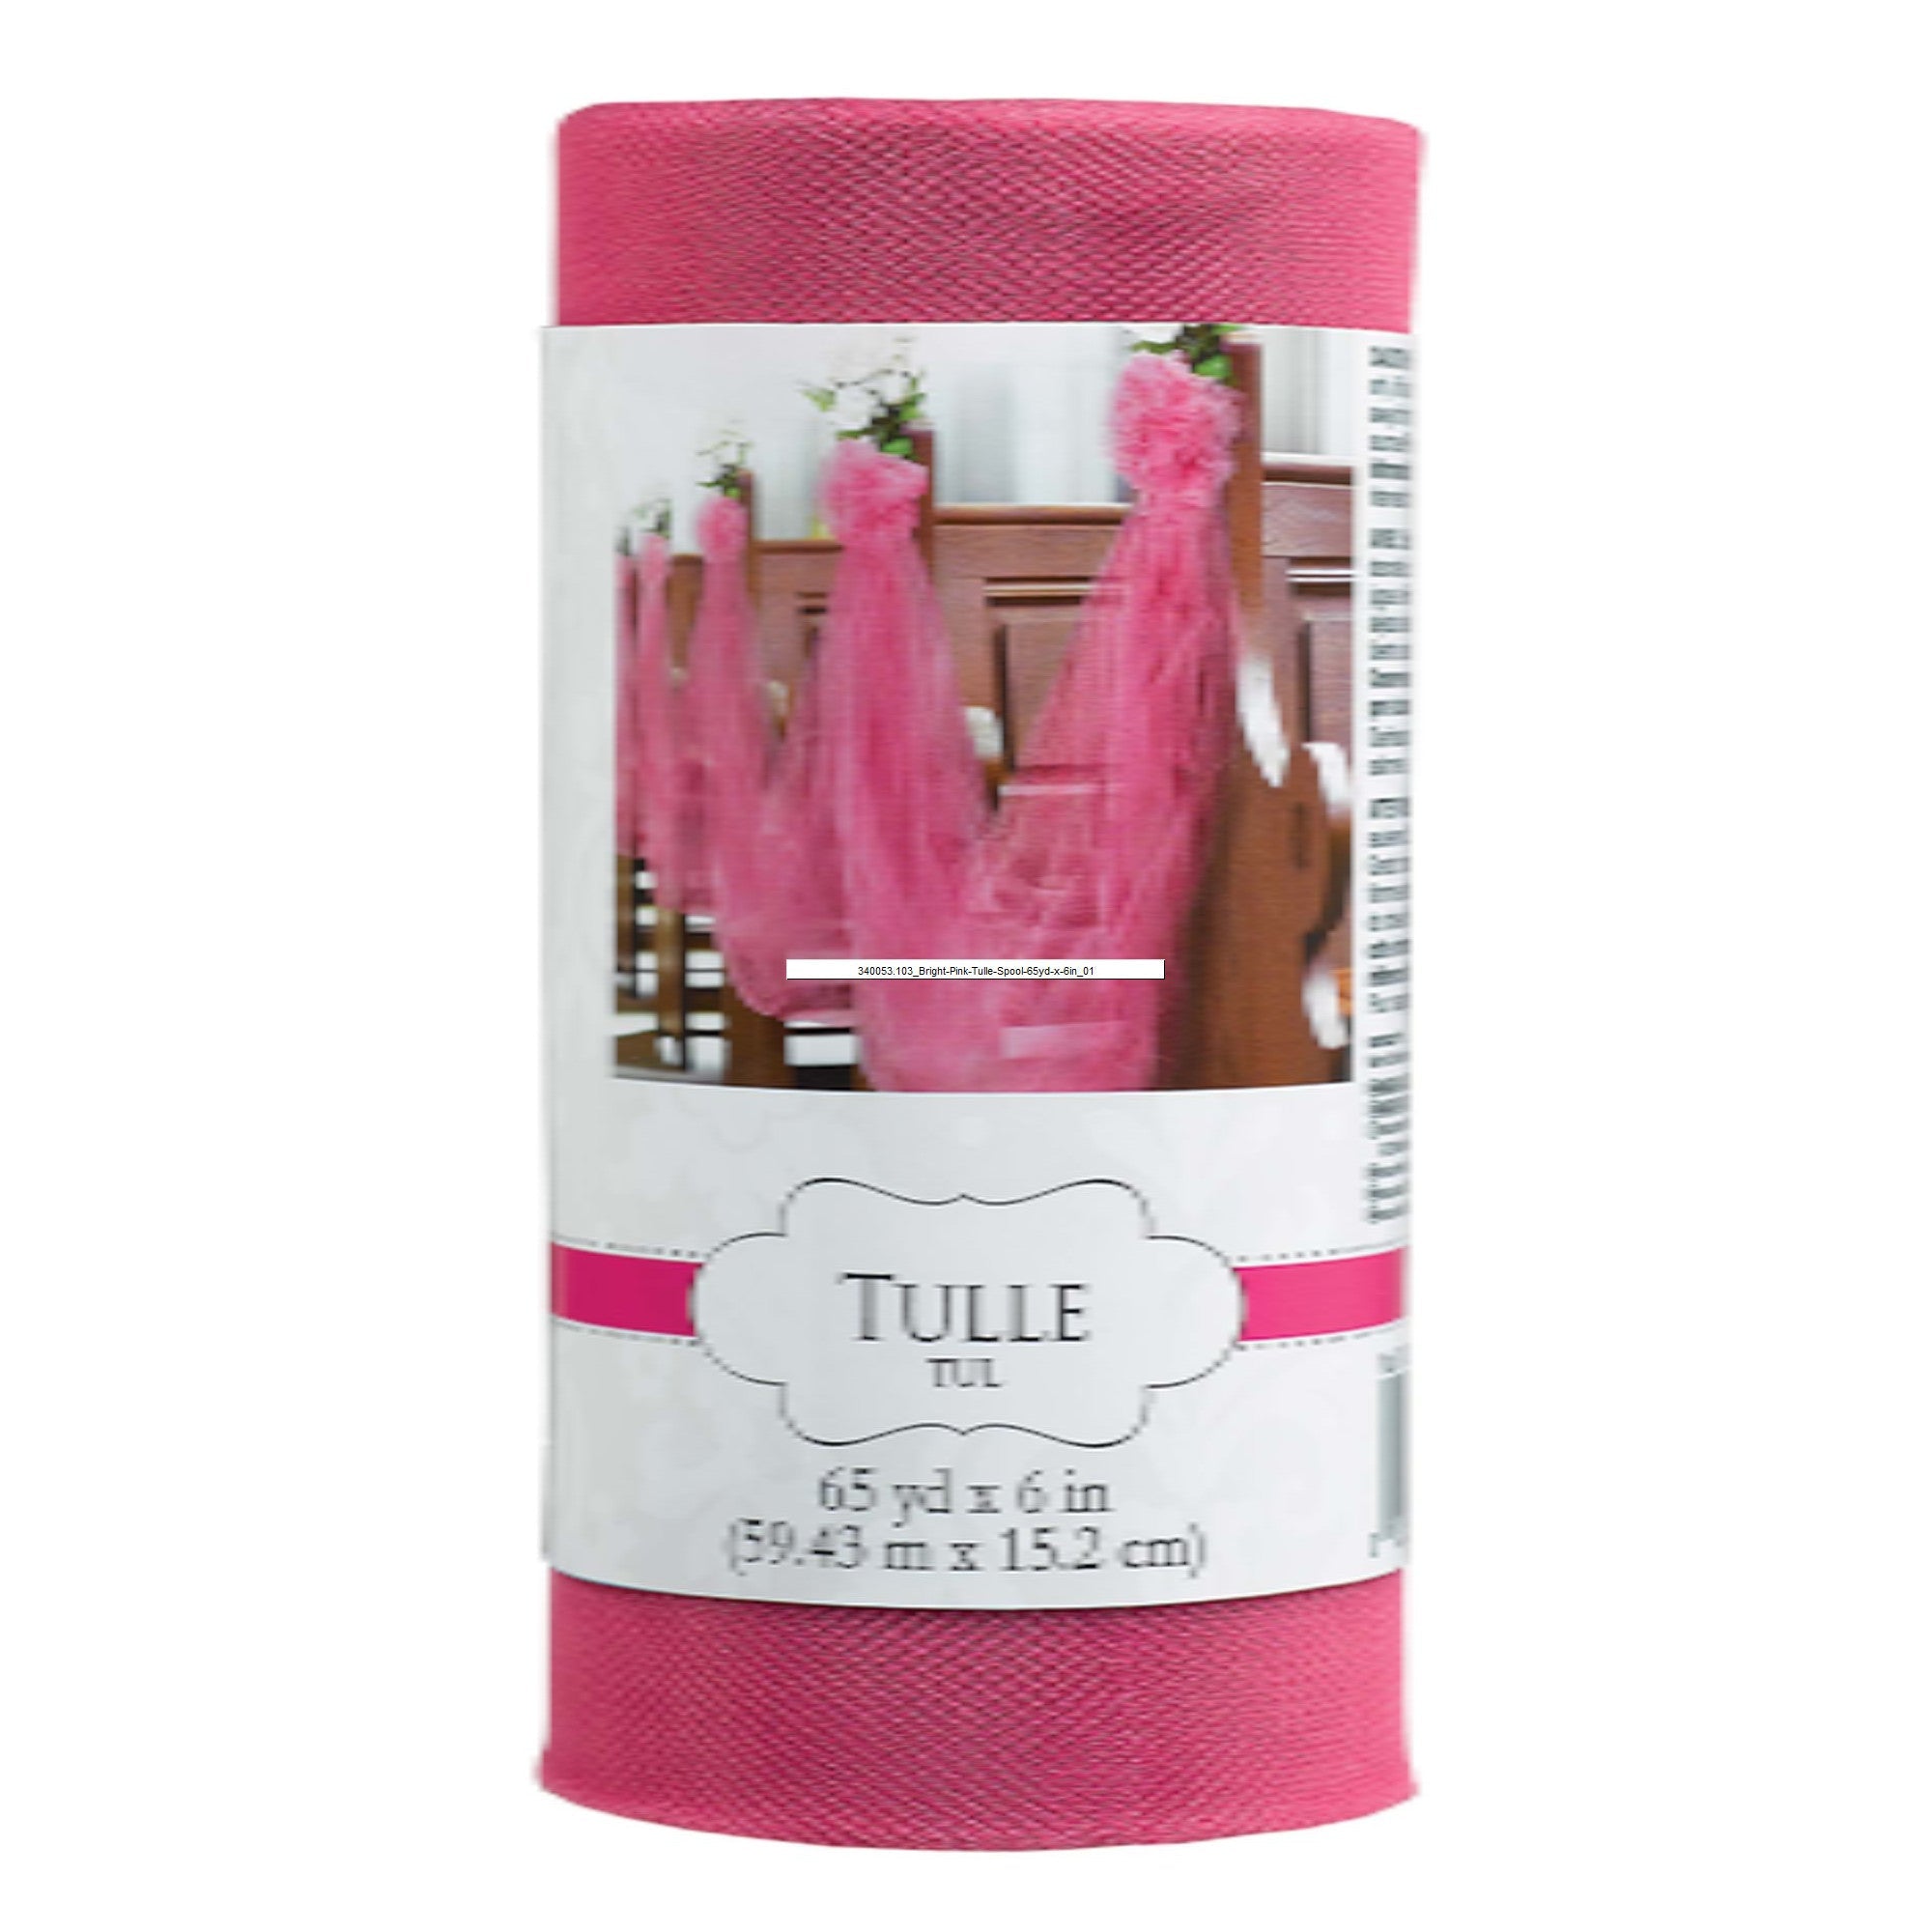 Bright Pink Tulle Spool 65yd x 6in